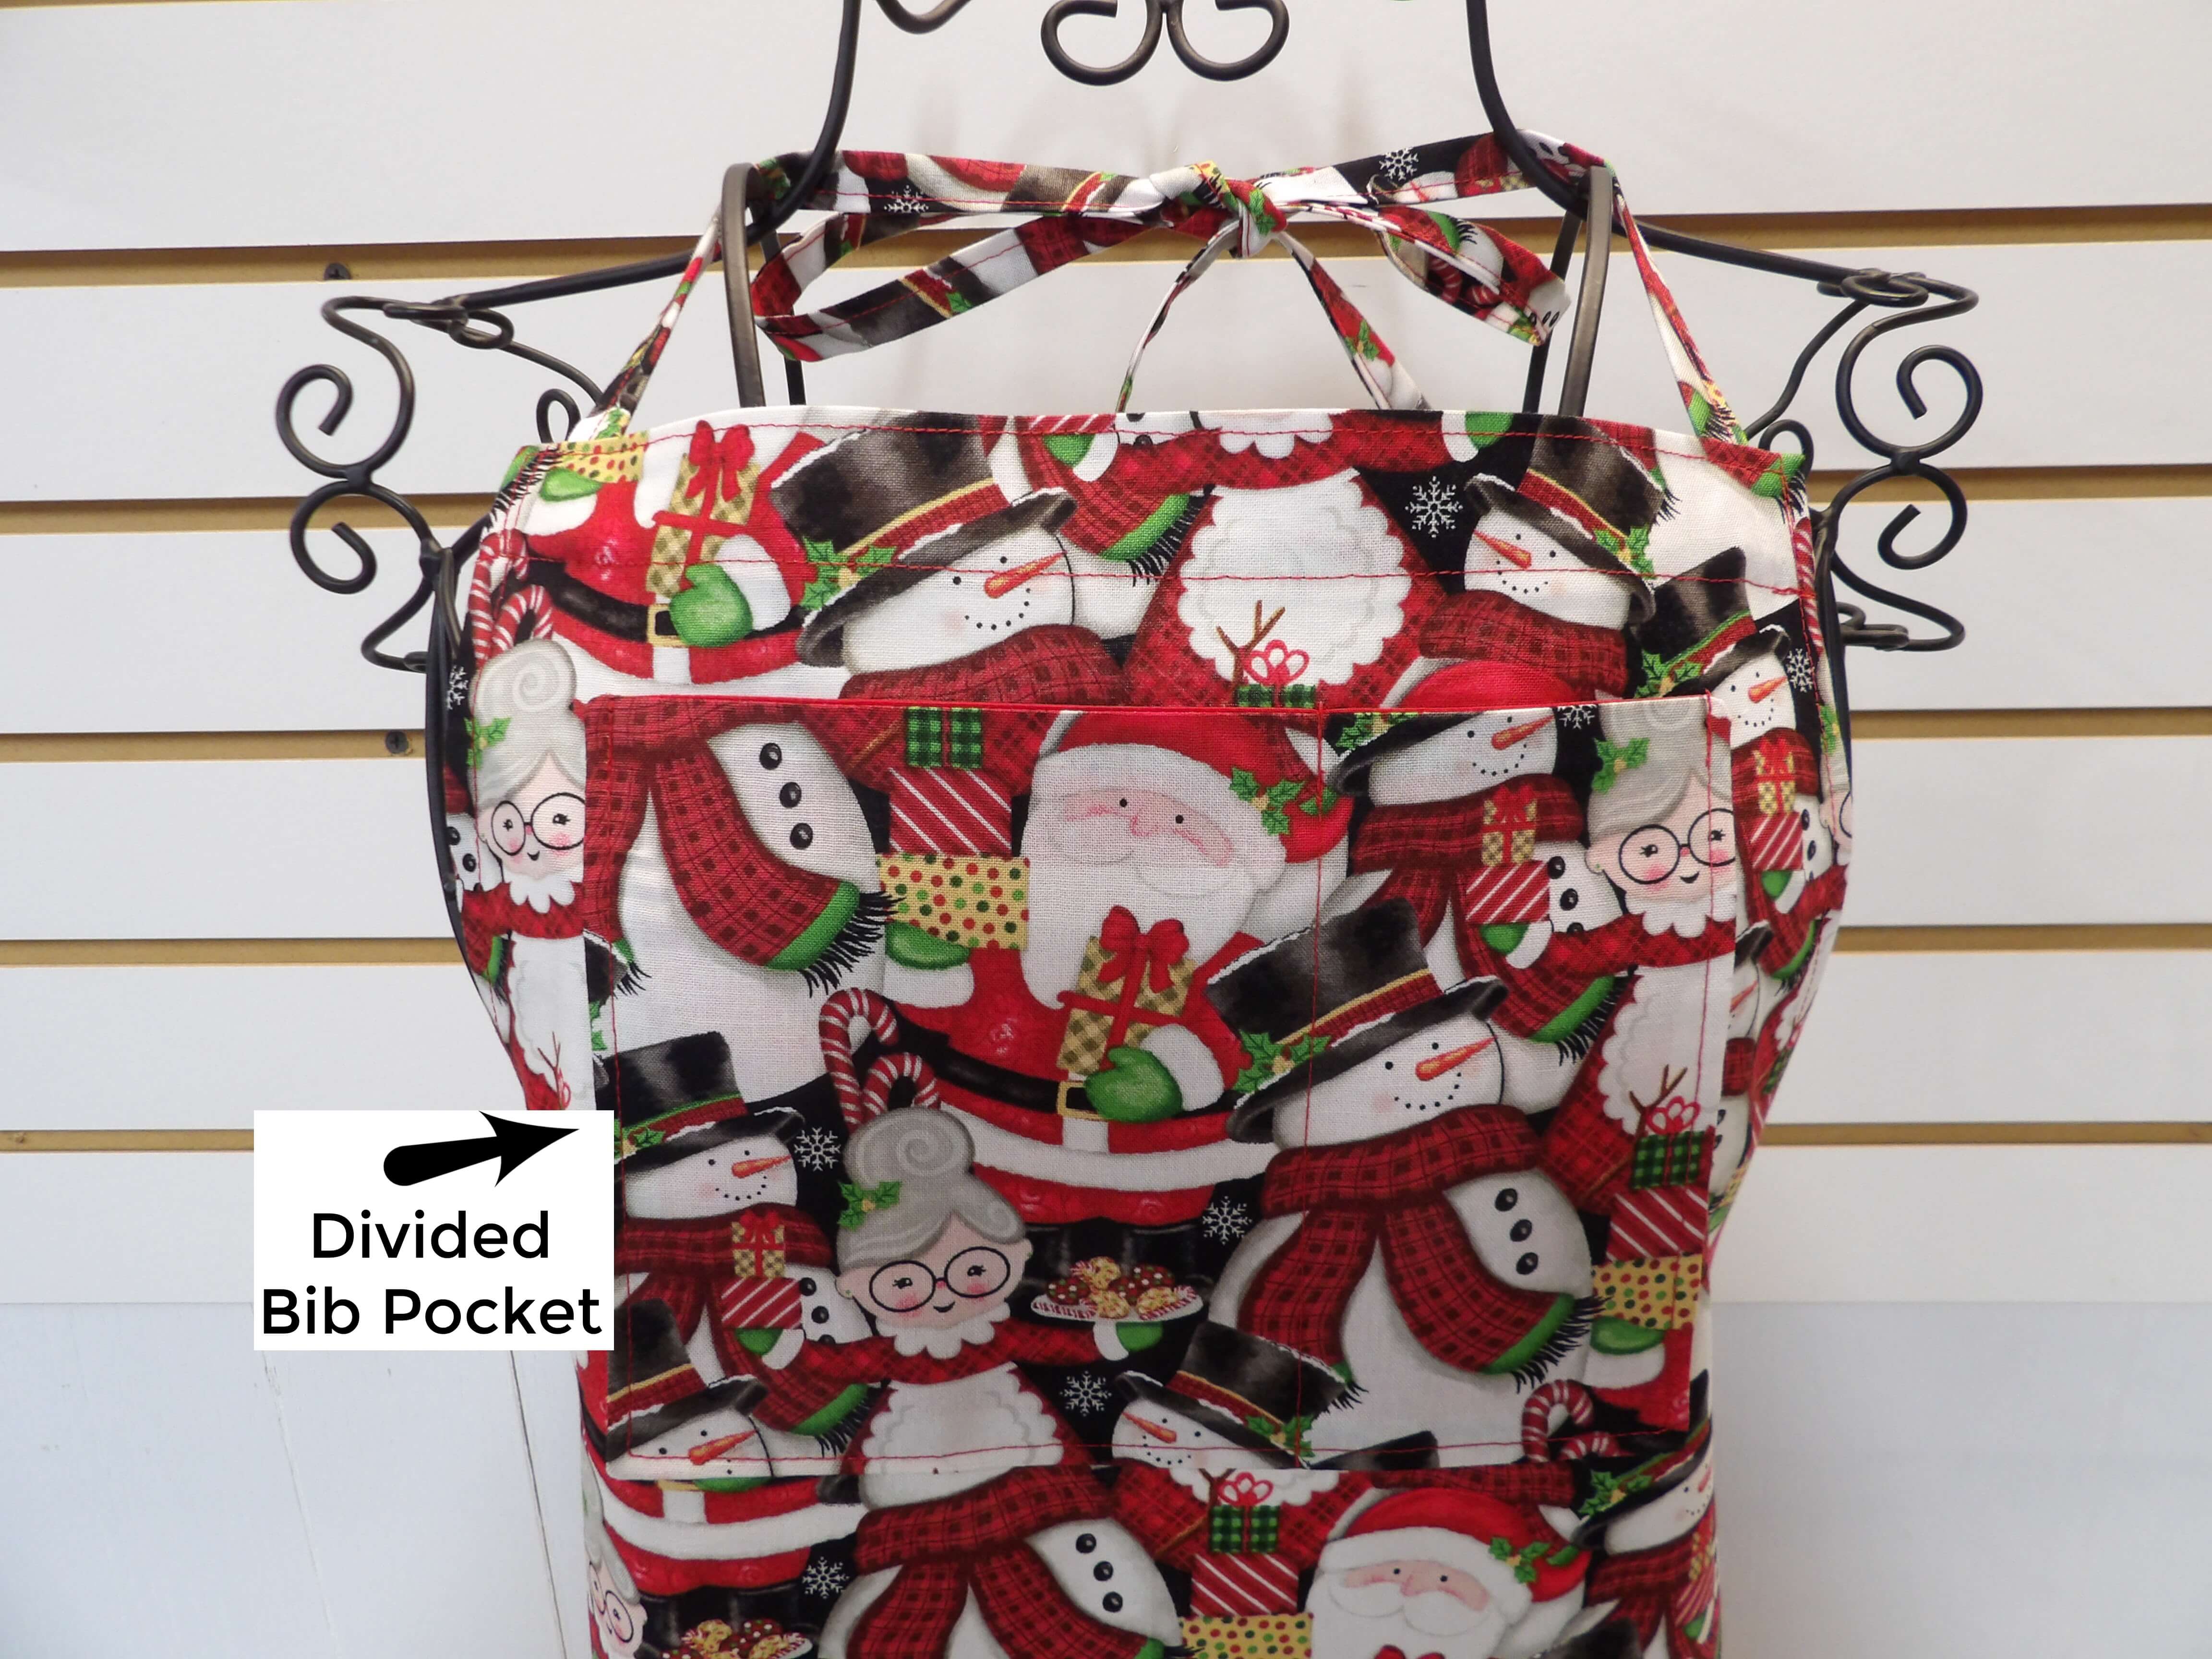 Mrs. Claus Matching Mother and Daughter Aprons